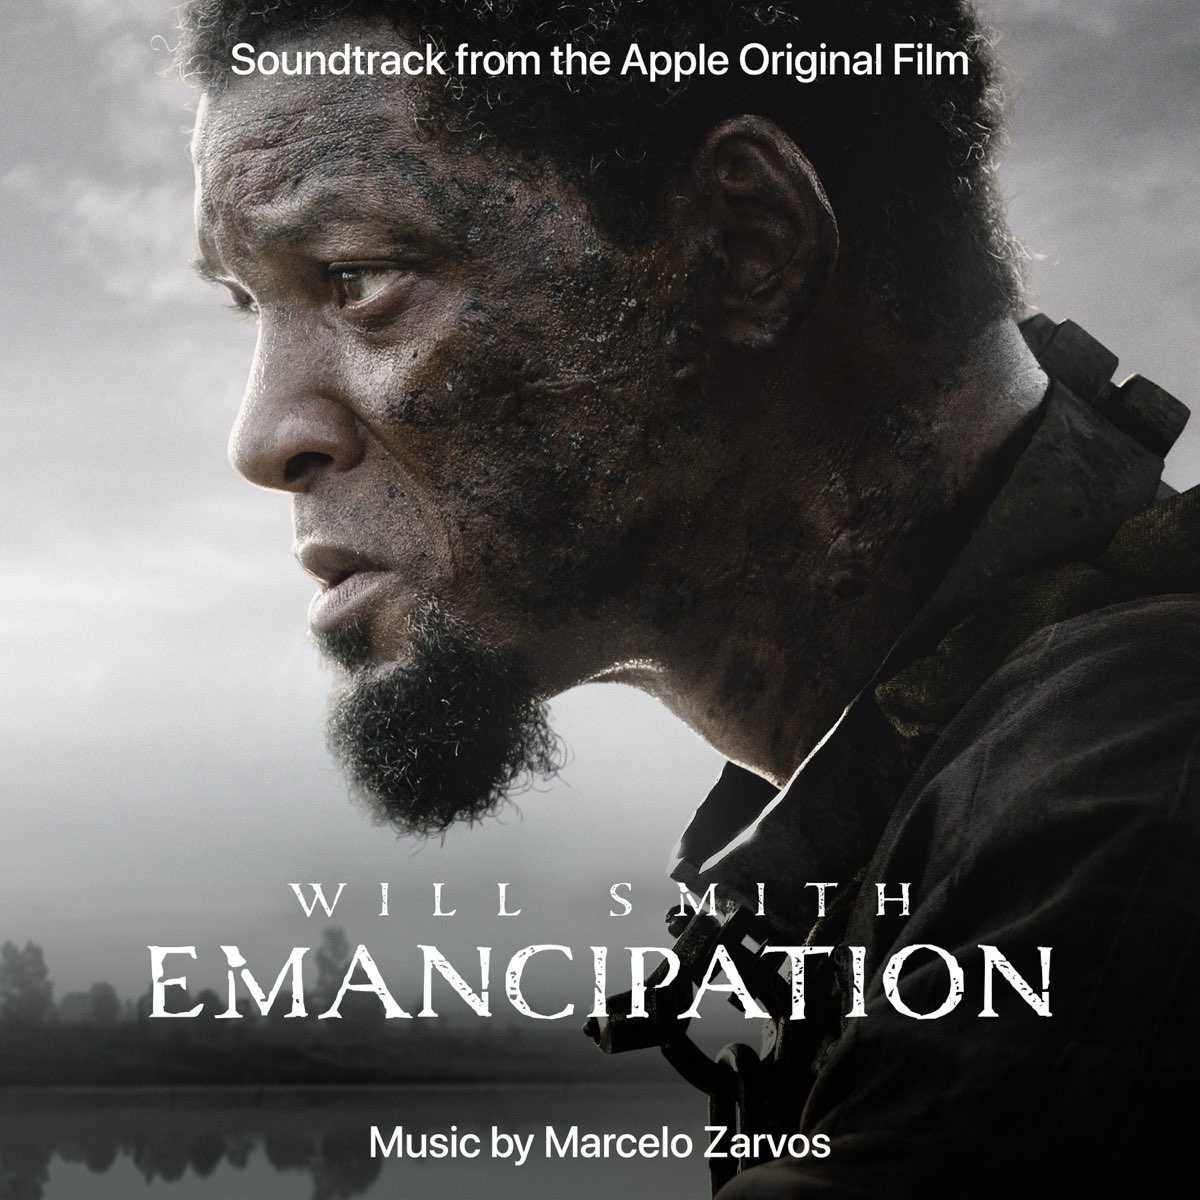 ‎emancipation Soundtrack From The Apple Original Film By Marcelo Zarvos On Apple Music